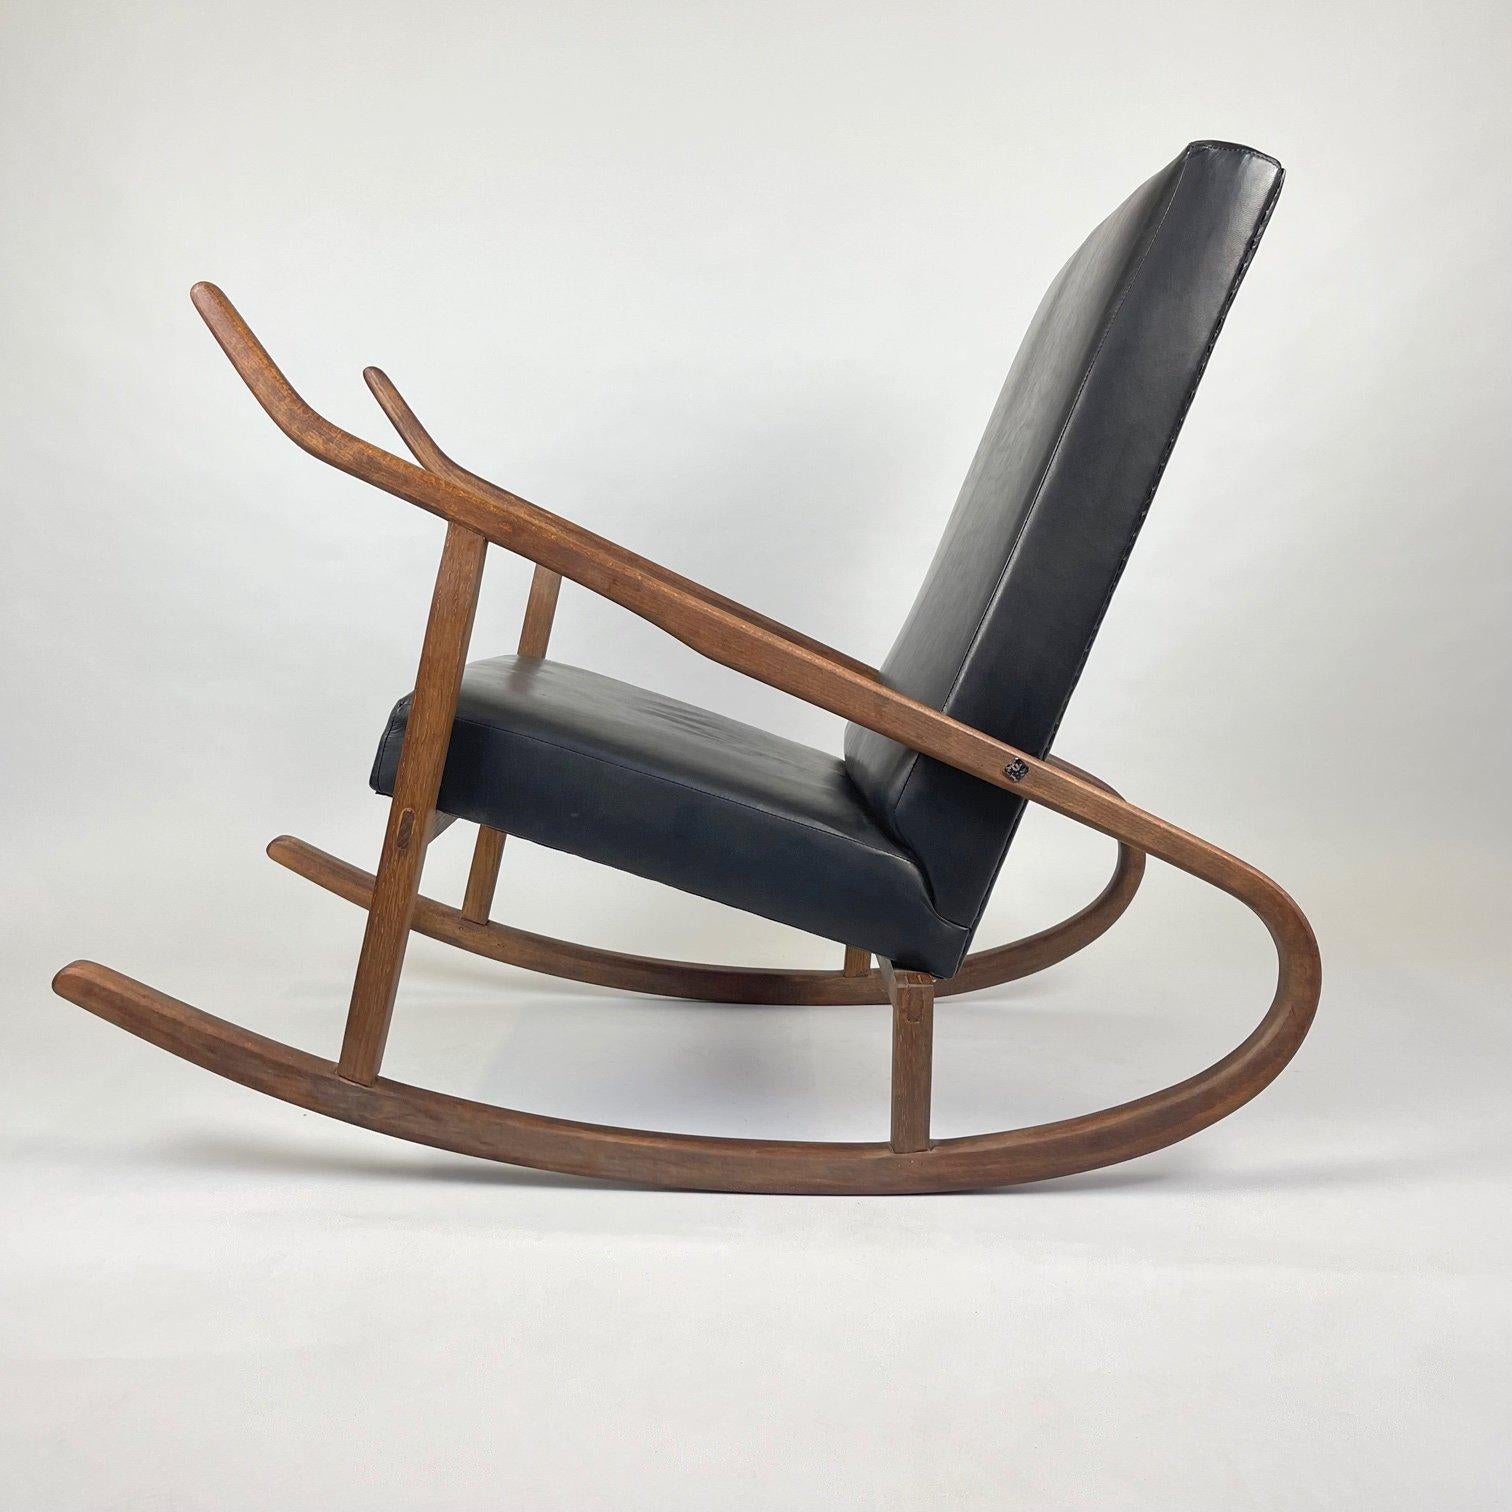 Comfortable, rarely seen, vintage rocking chair after complete renovation. 
The new upholstery is made of goatskin.